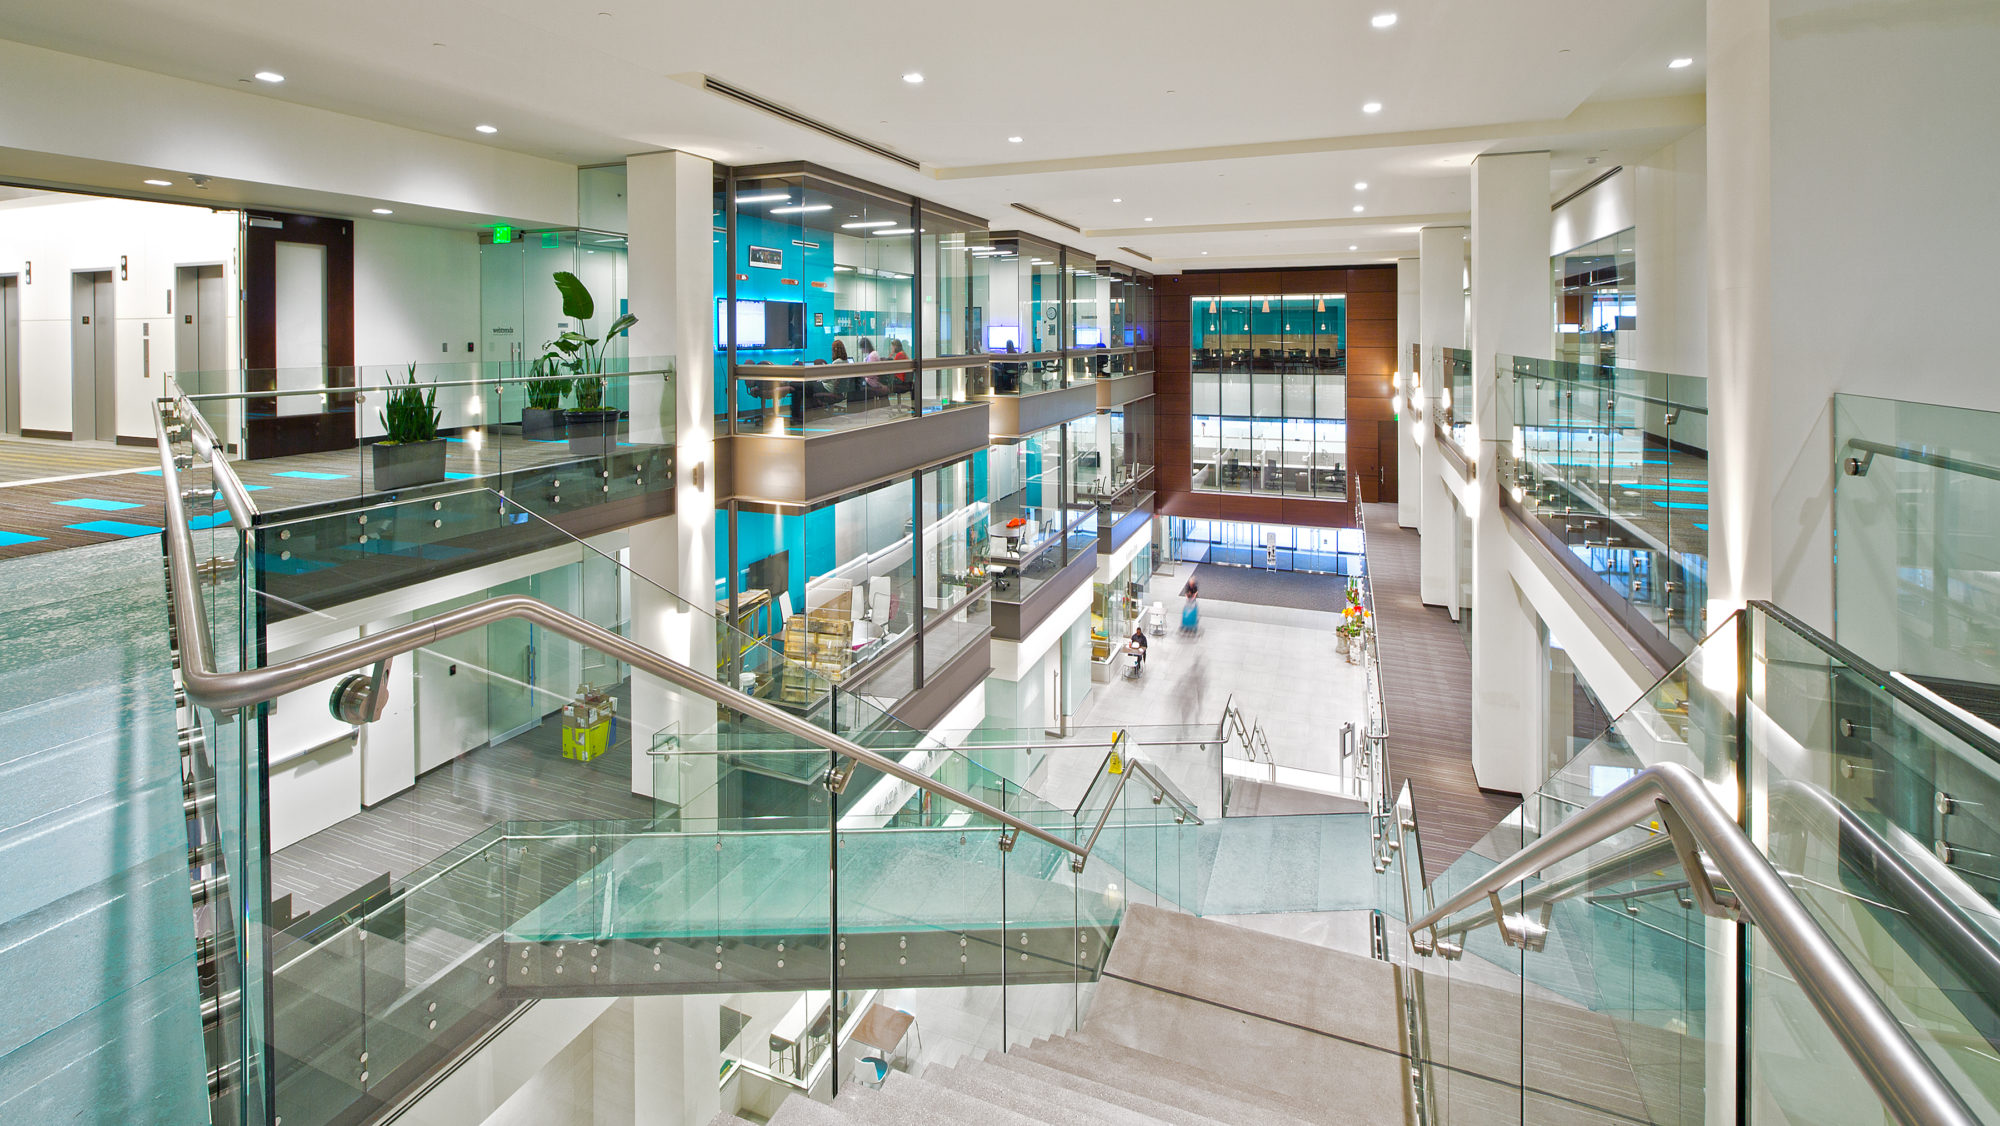 Interior of US Bancorp Tower with modern glass and wood finishes.